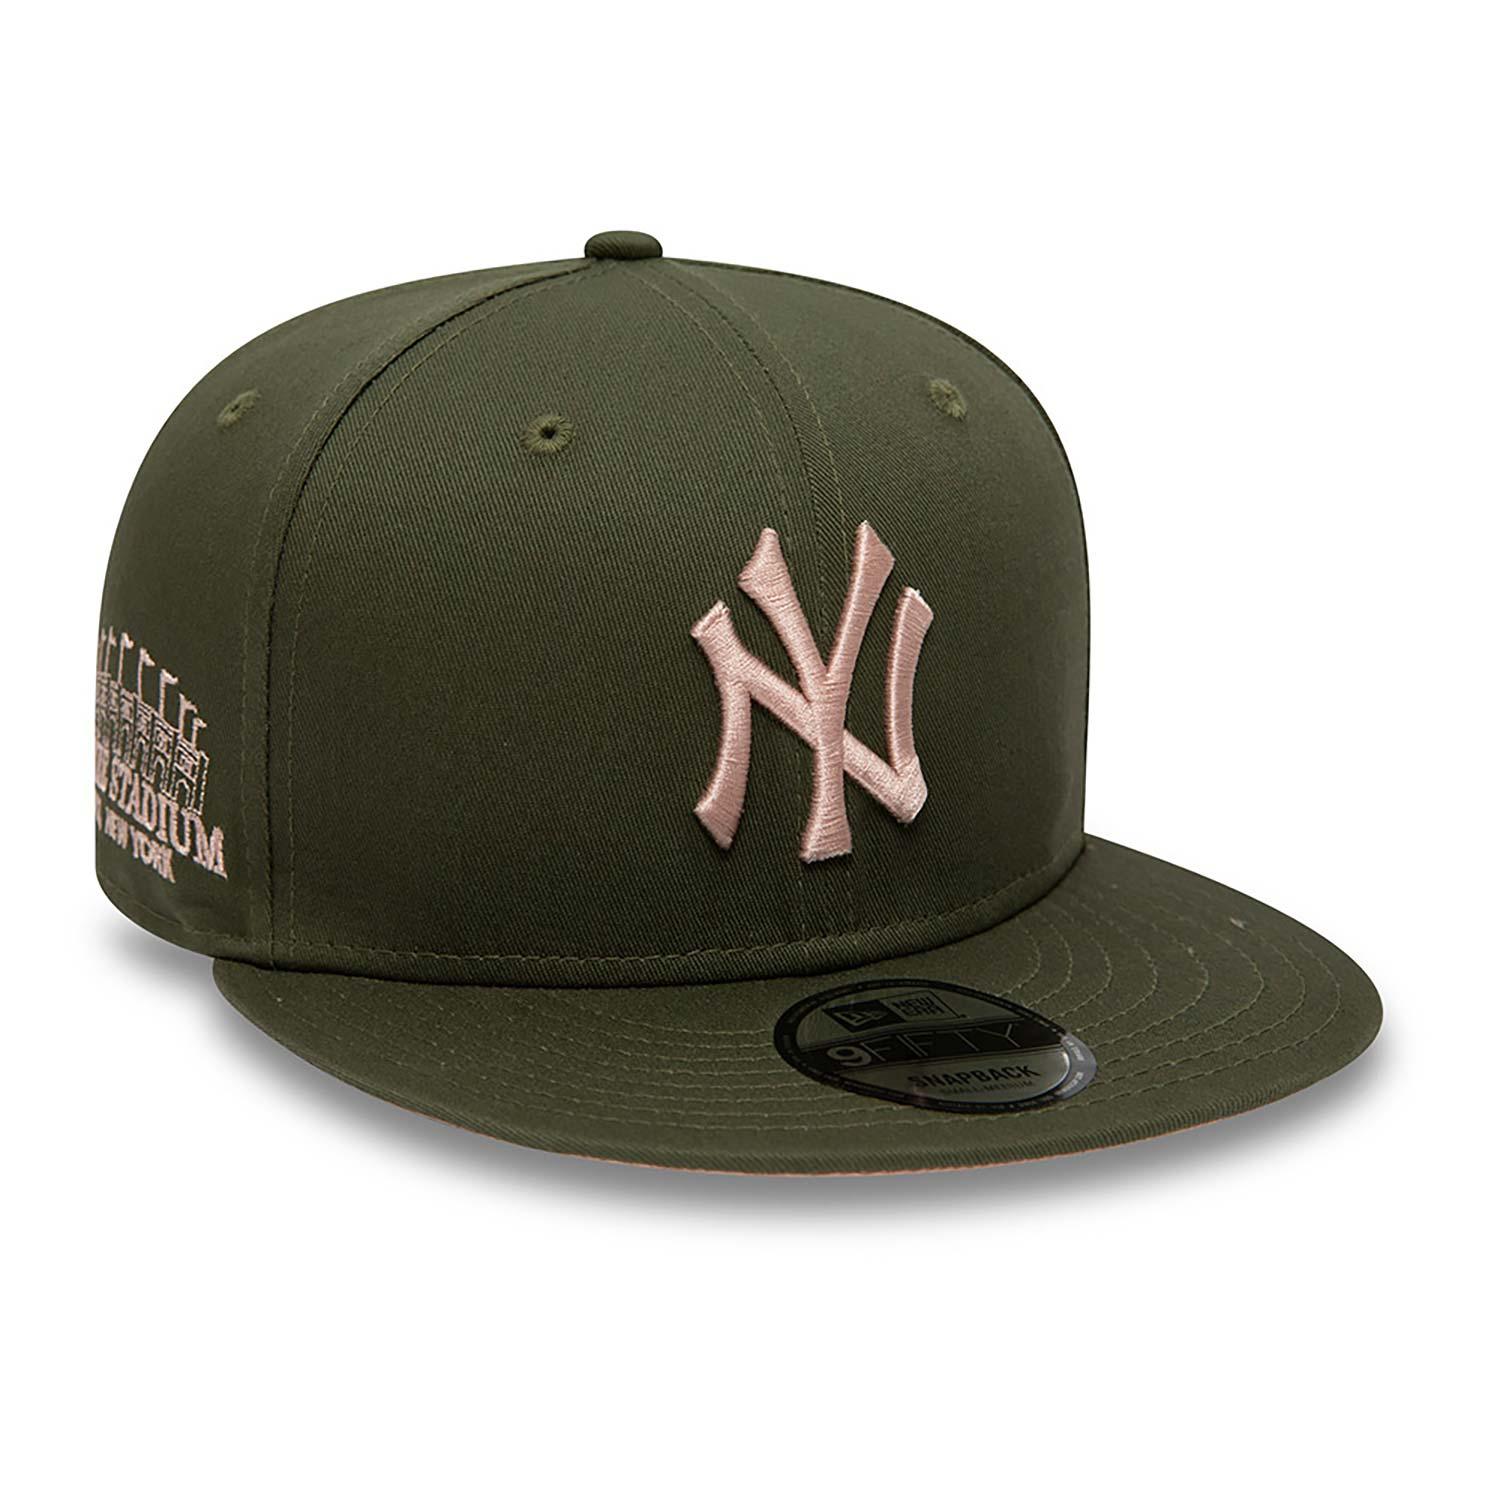 NEW ERA 9FIFTY SIDE PATCH NEW YORK YANKEES GREEN SNAPBACK - FAM